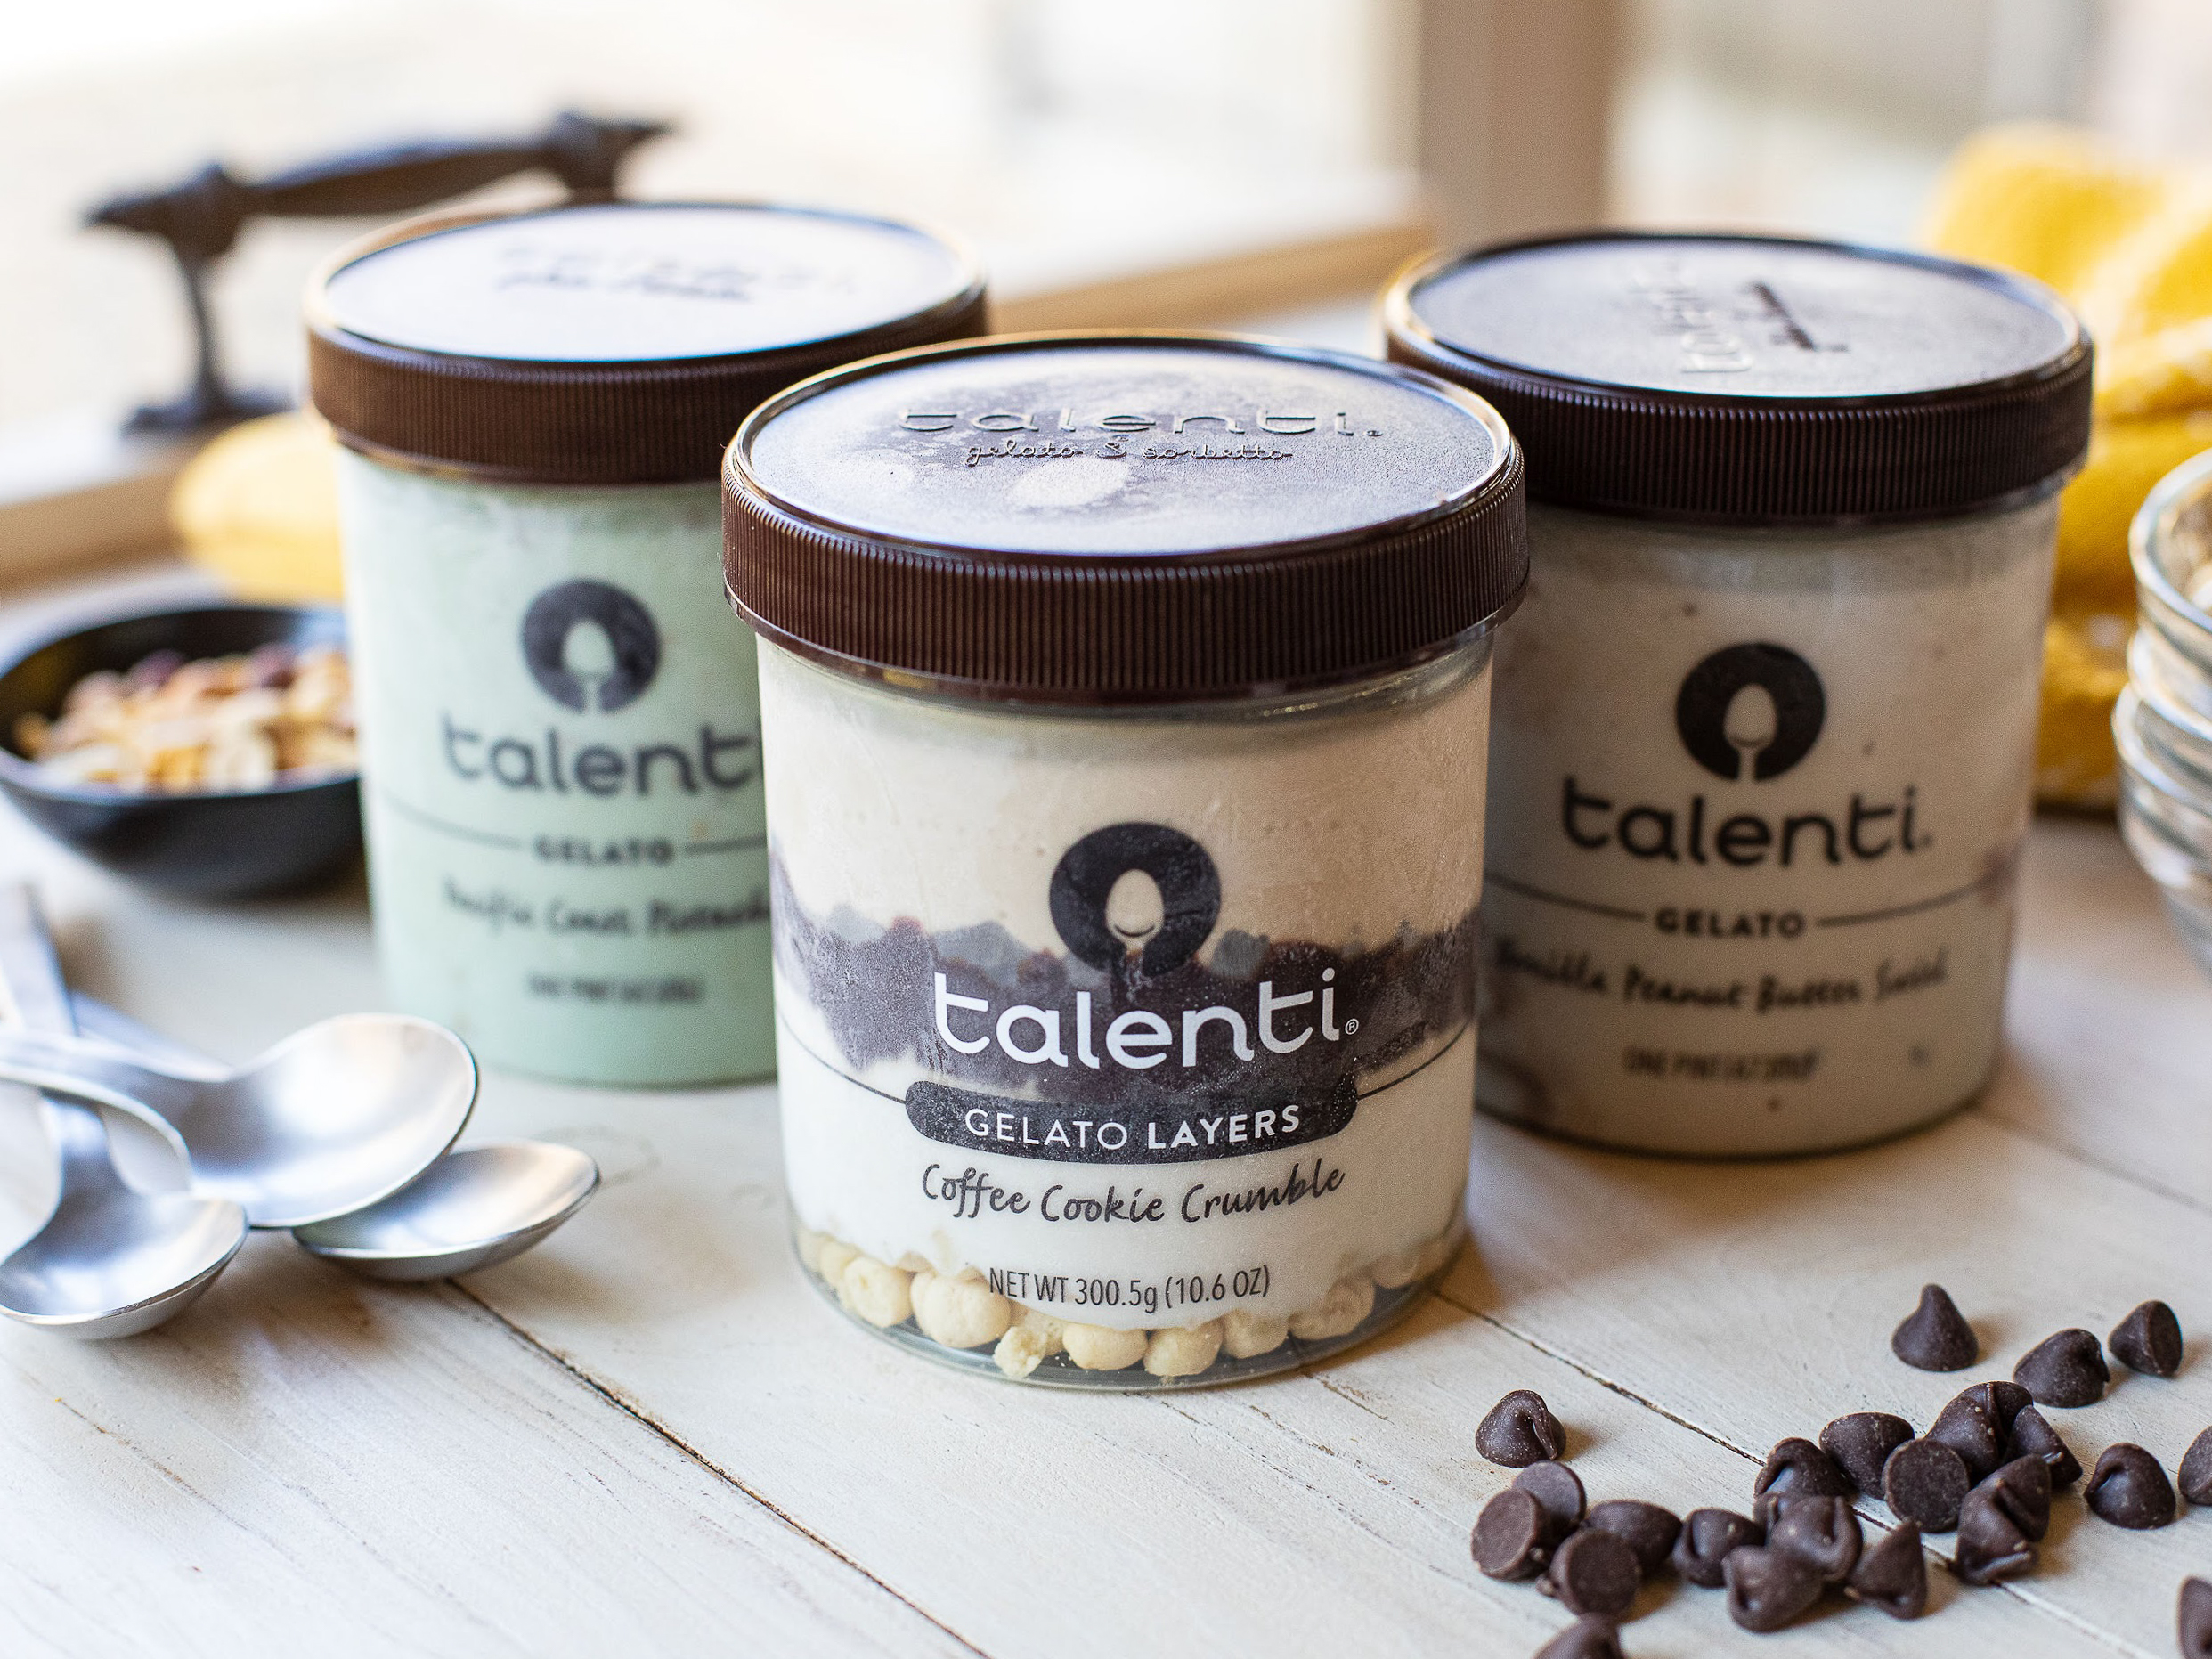 Grab Saving On Talenti At Publix And Earn A Gift Card Too - Winning Combination! on I Heart Publix